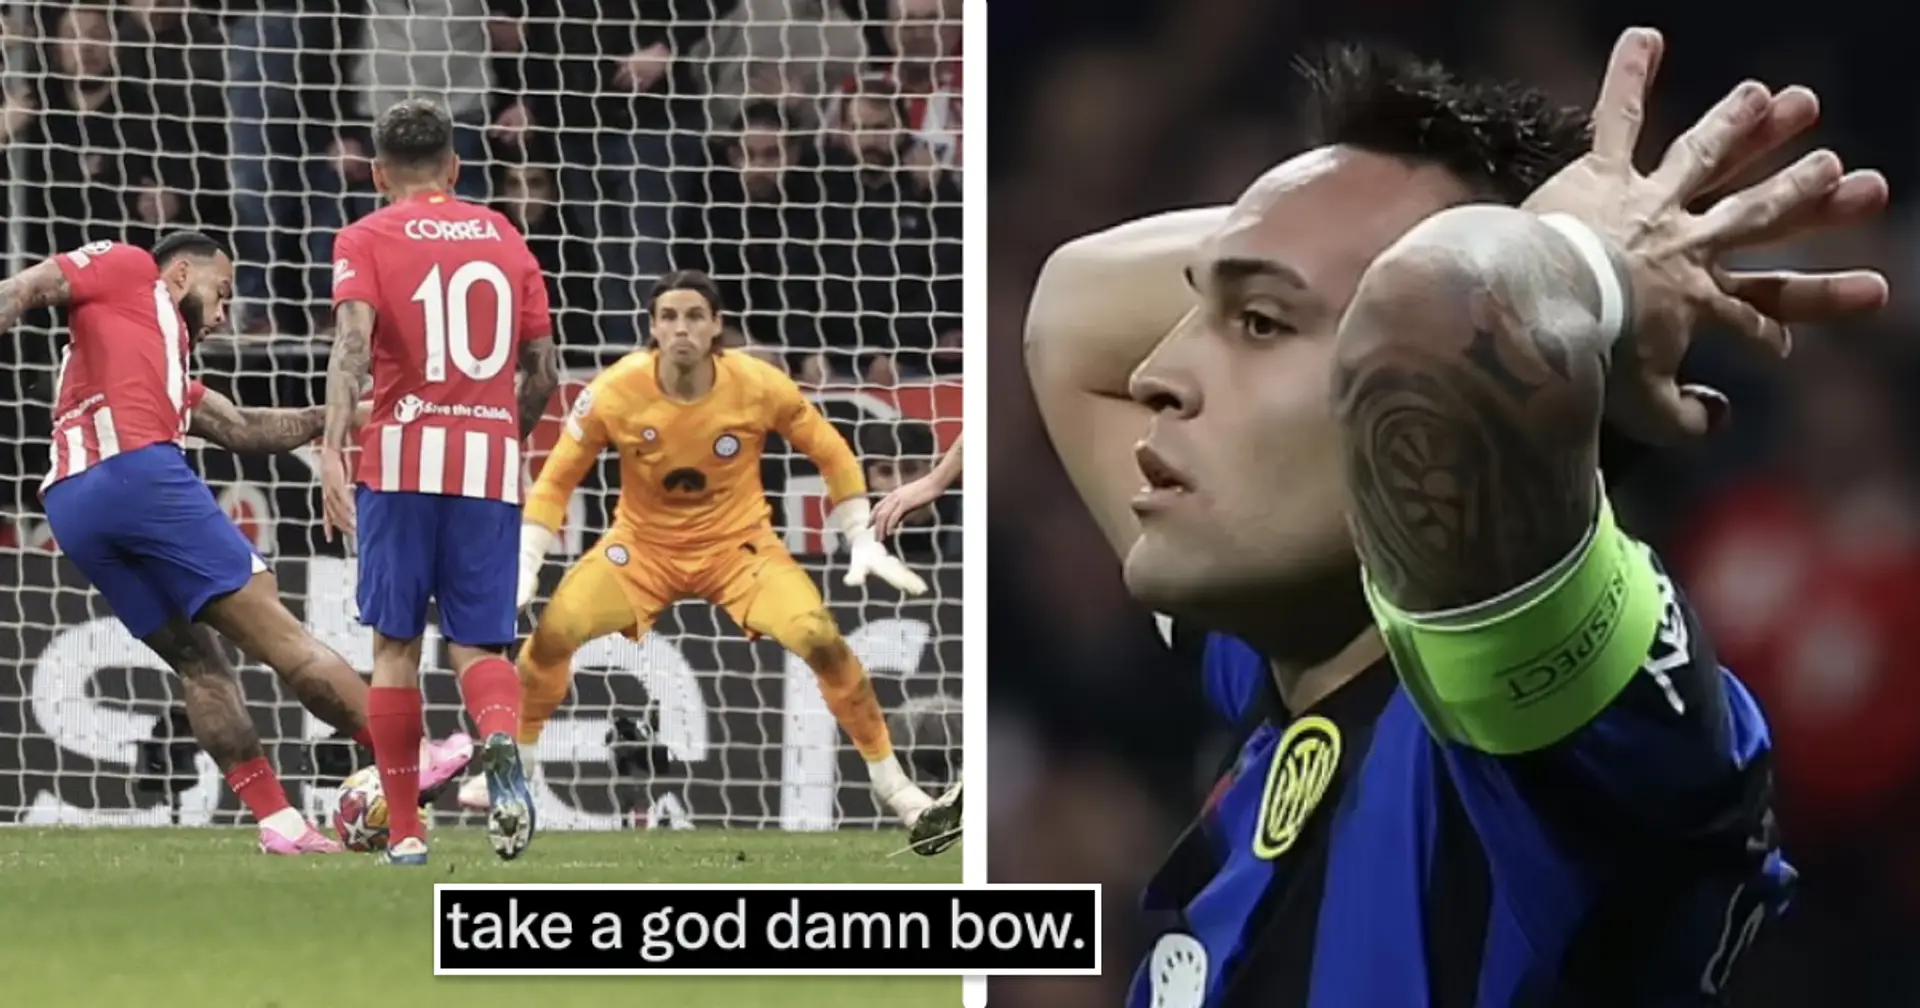 Ex-Barca player drops stunning super-sub performance to eliminate Inter Milan from Champions League